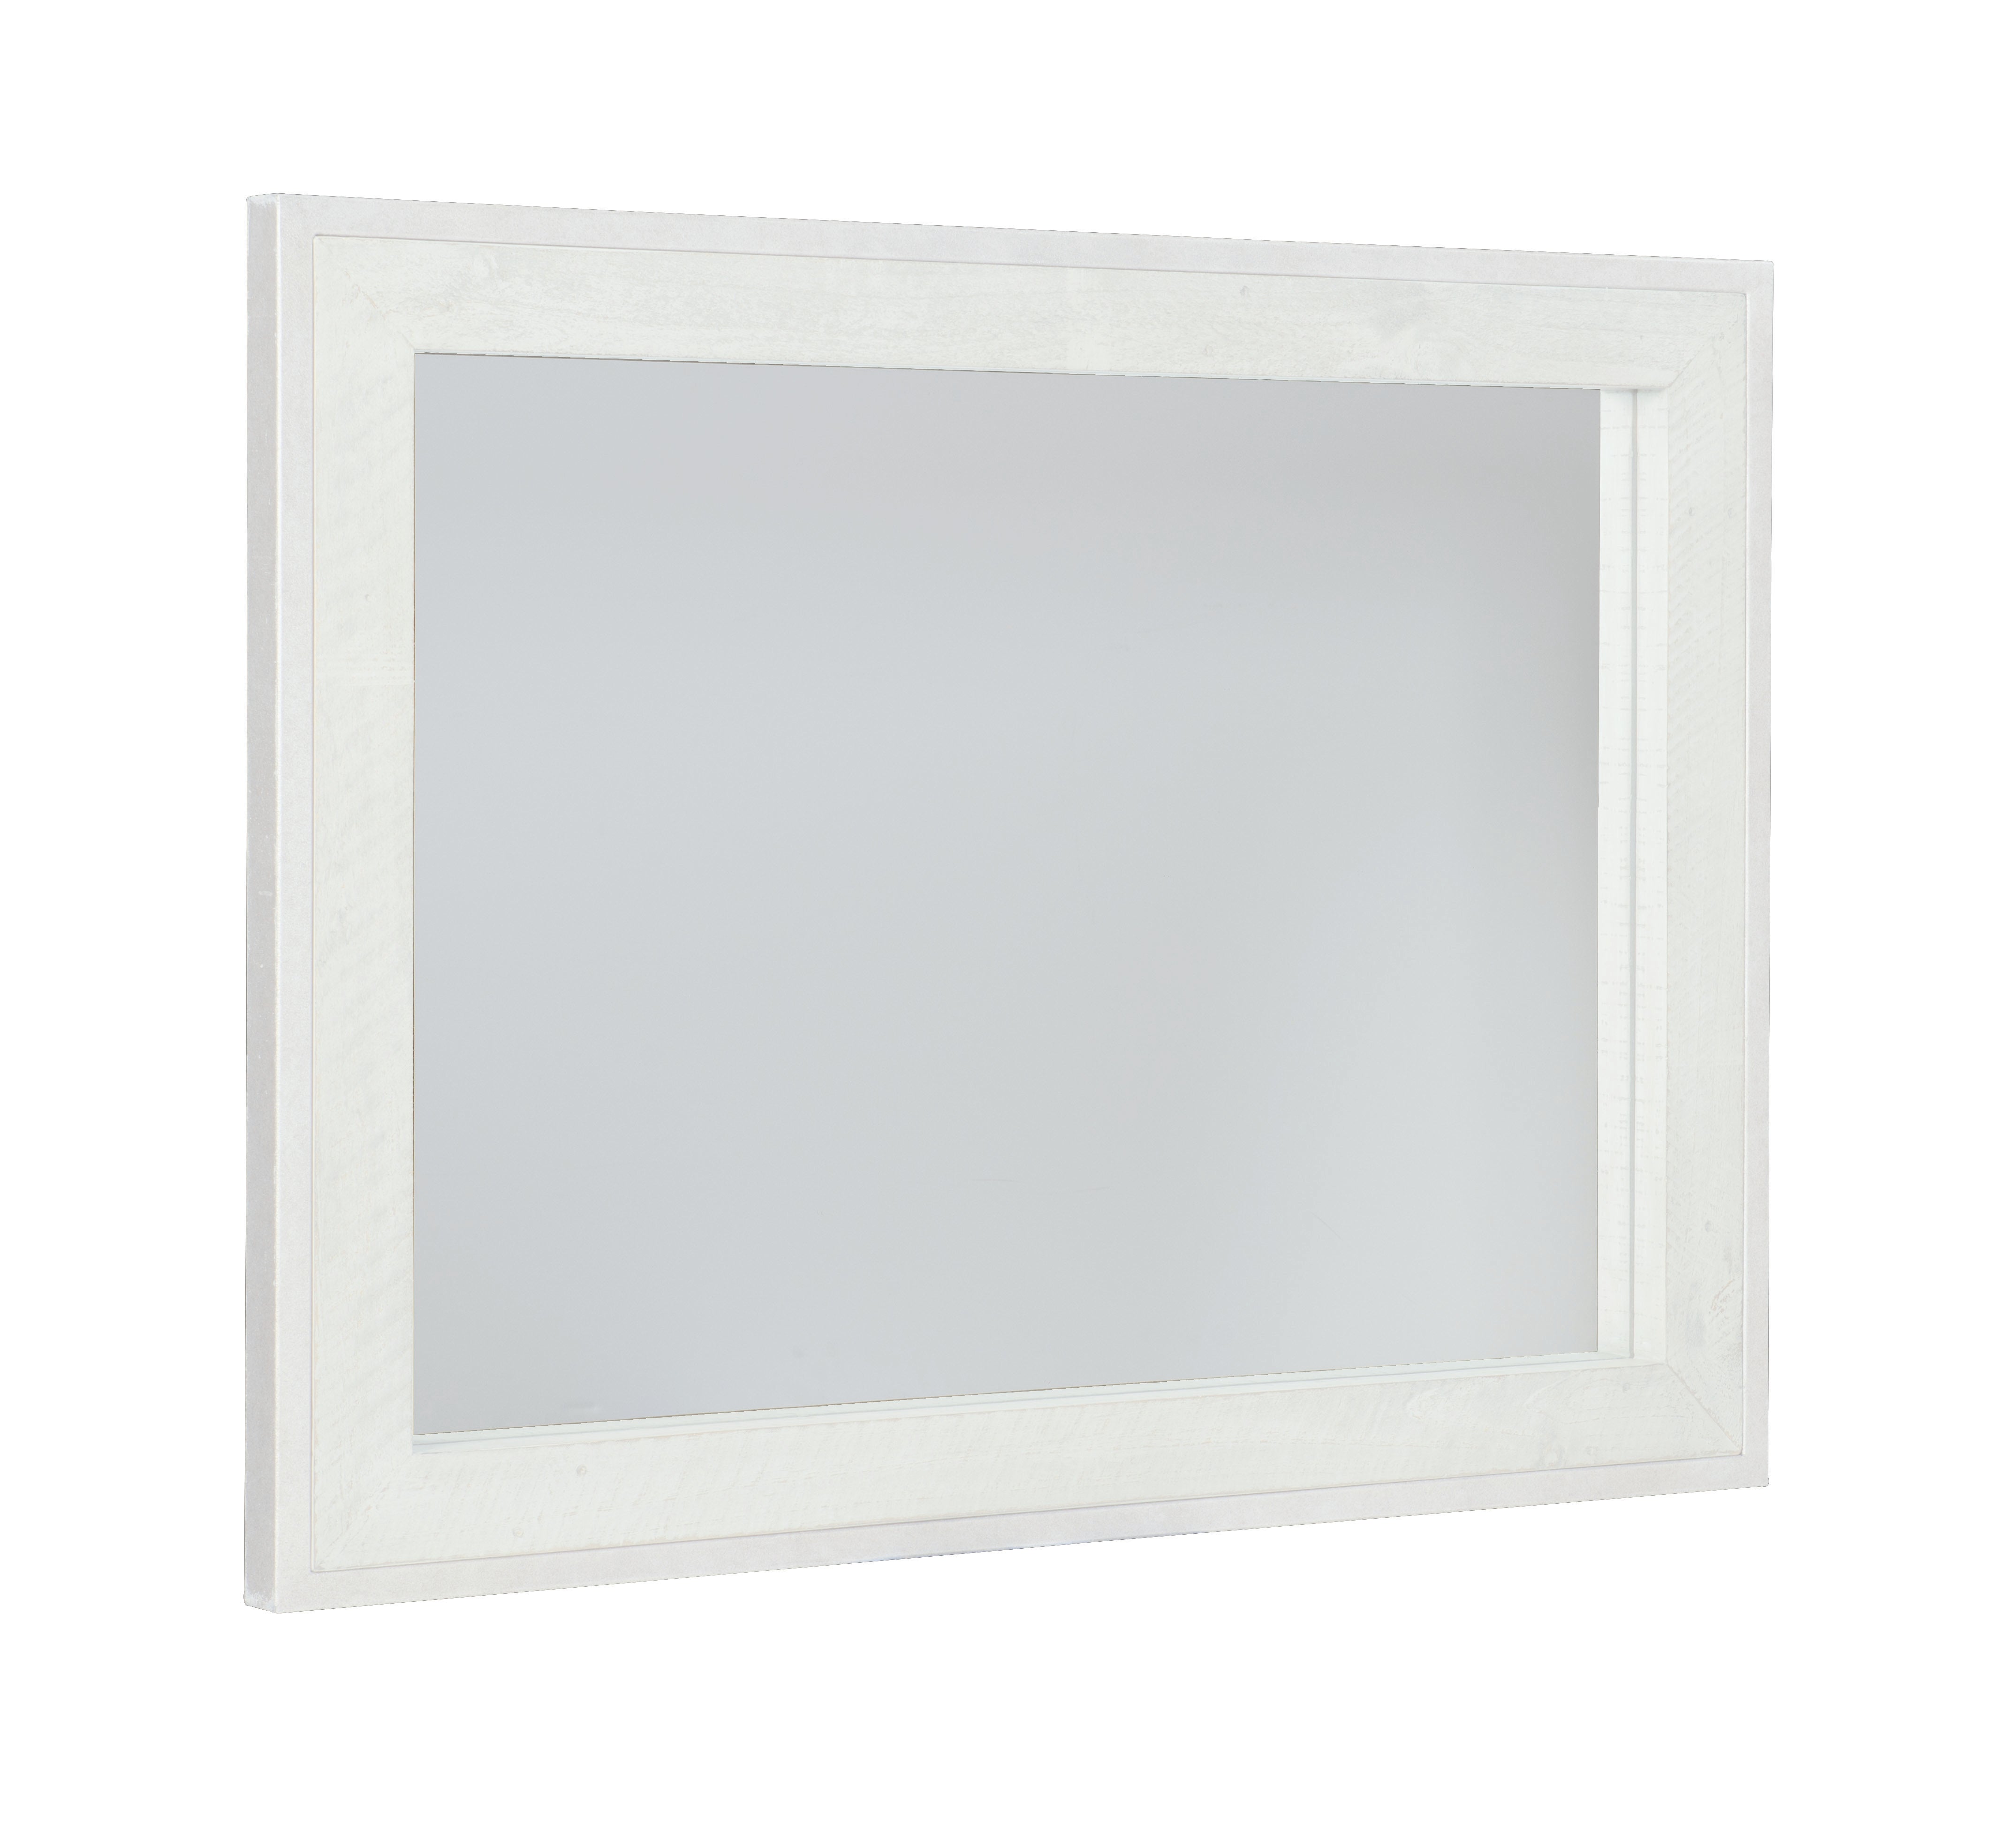 Denys Mirror in Brushed White